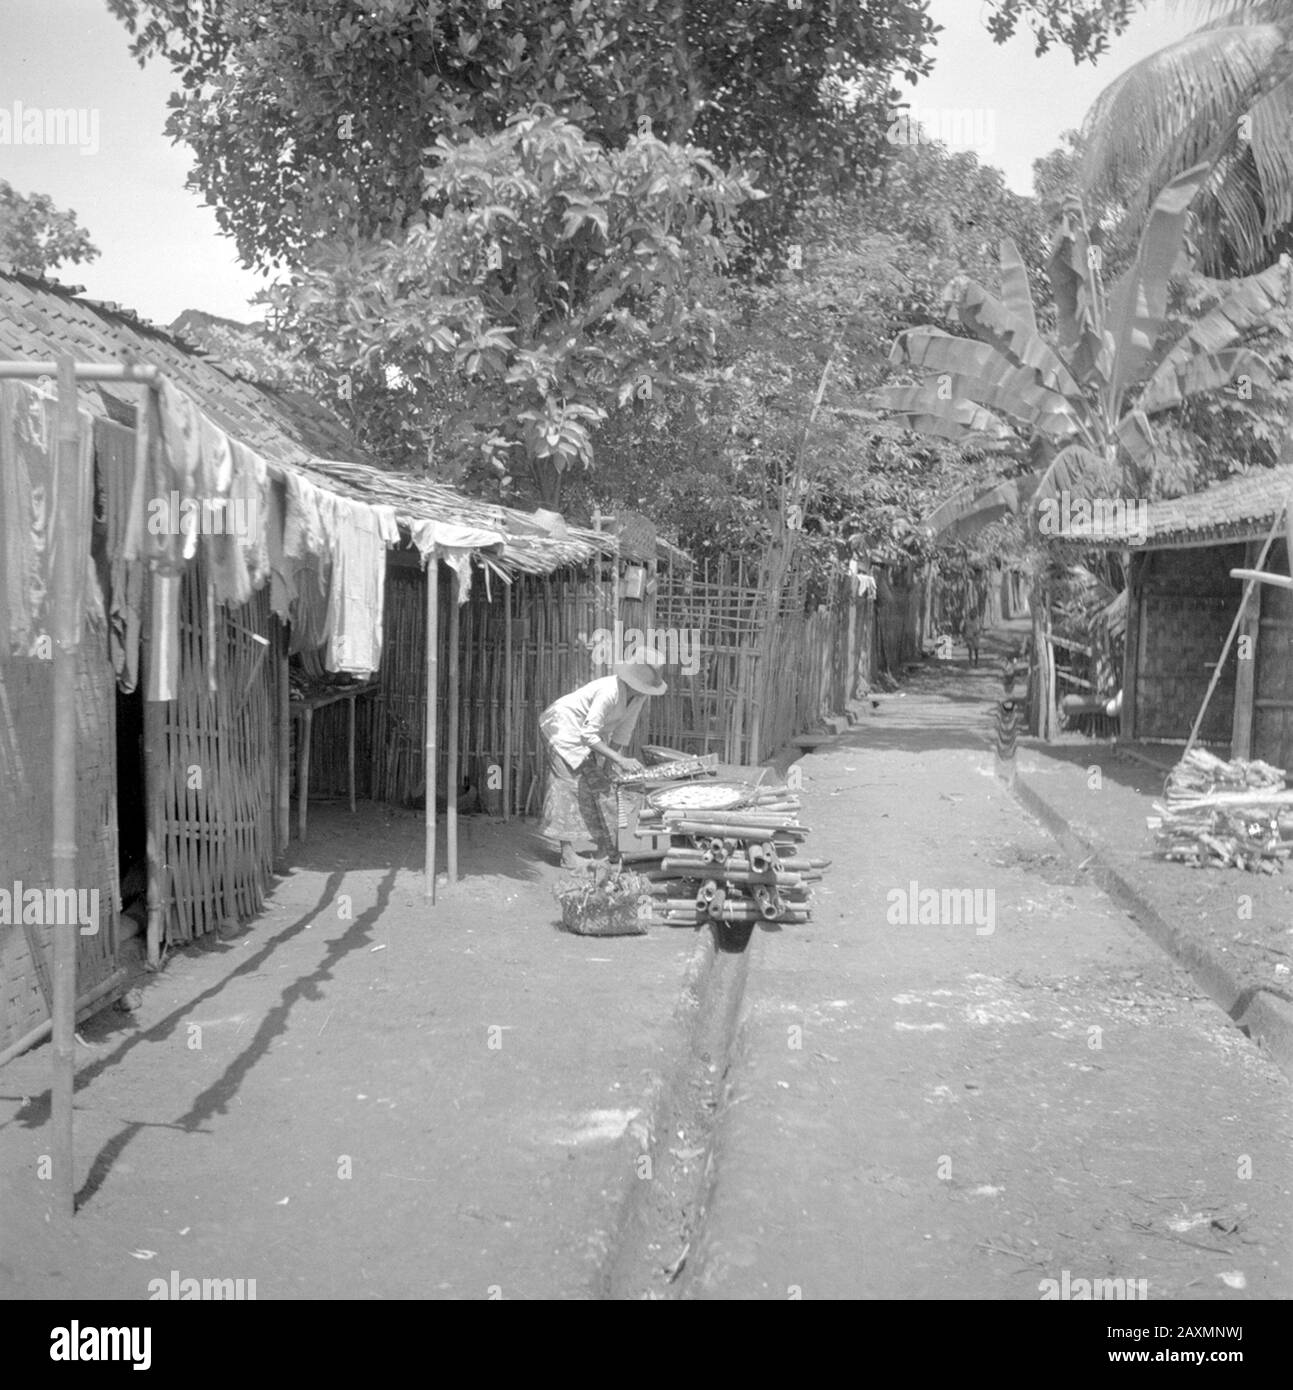 Kampong Java Date: 1946 Creator: Poll, Willem van de Filenumber: 255-6721 URL: http://beeldbank.nationaalarchief.nl/na:col1:dat451610 Tong Tong Fair 2010 The National Archives, EYE Film Institute Netherlands and the Dutch Institute for Sound and presenting never seen before archive material about Dutch East Indies and Indonesia in the Culture Pavilion at the Tong Tong Fair from 19 to May 30 in the Hague. The project Images for the Future, in which these three organizations work together on a digitization process, this year has the theme 'Indonesia'. More information on http://www.beeldenvoorde Stock Photo